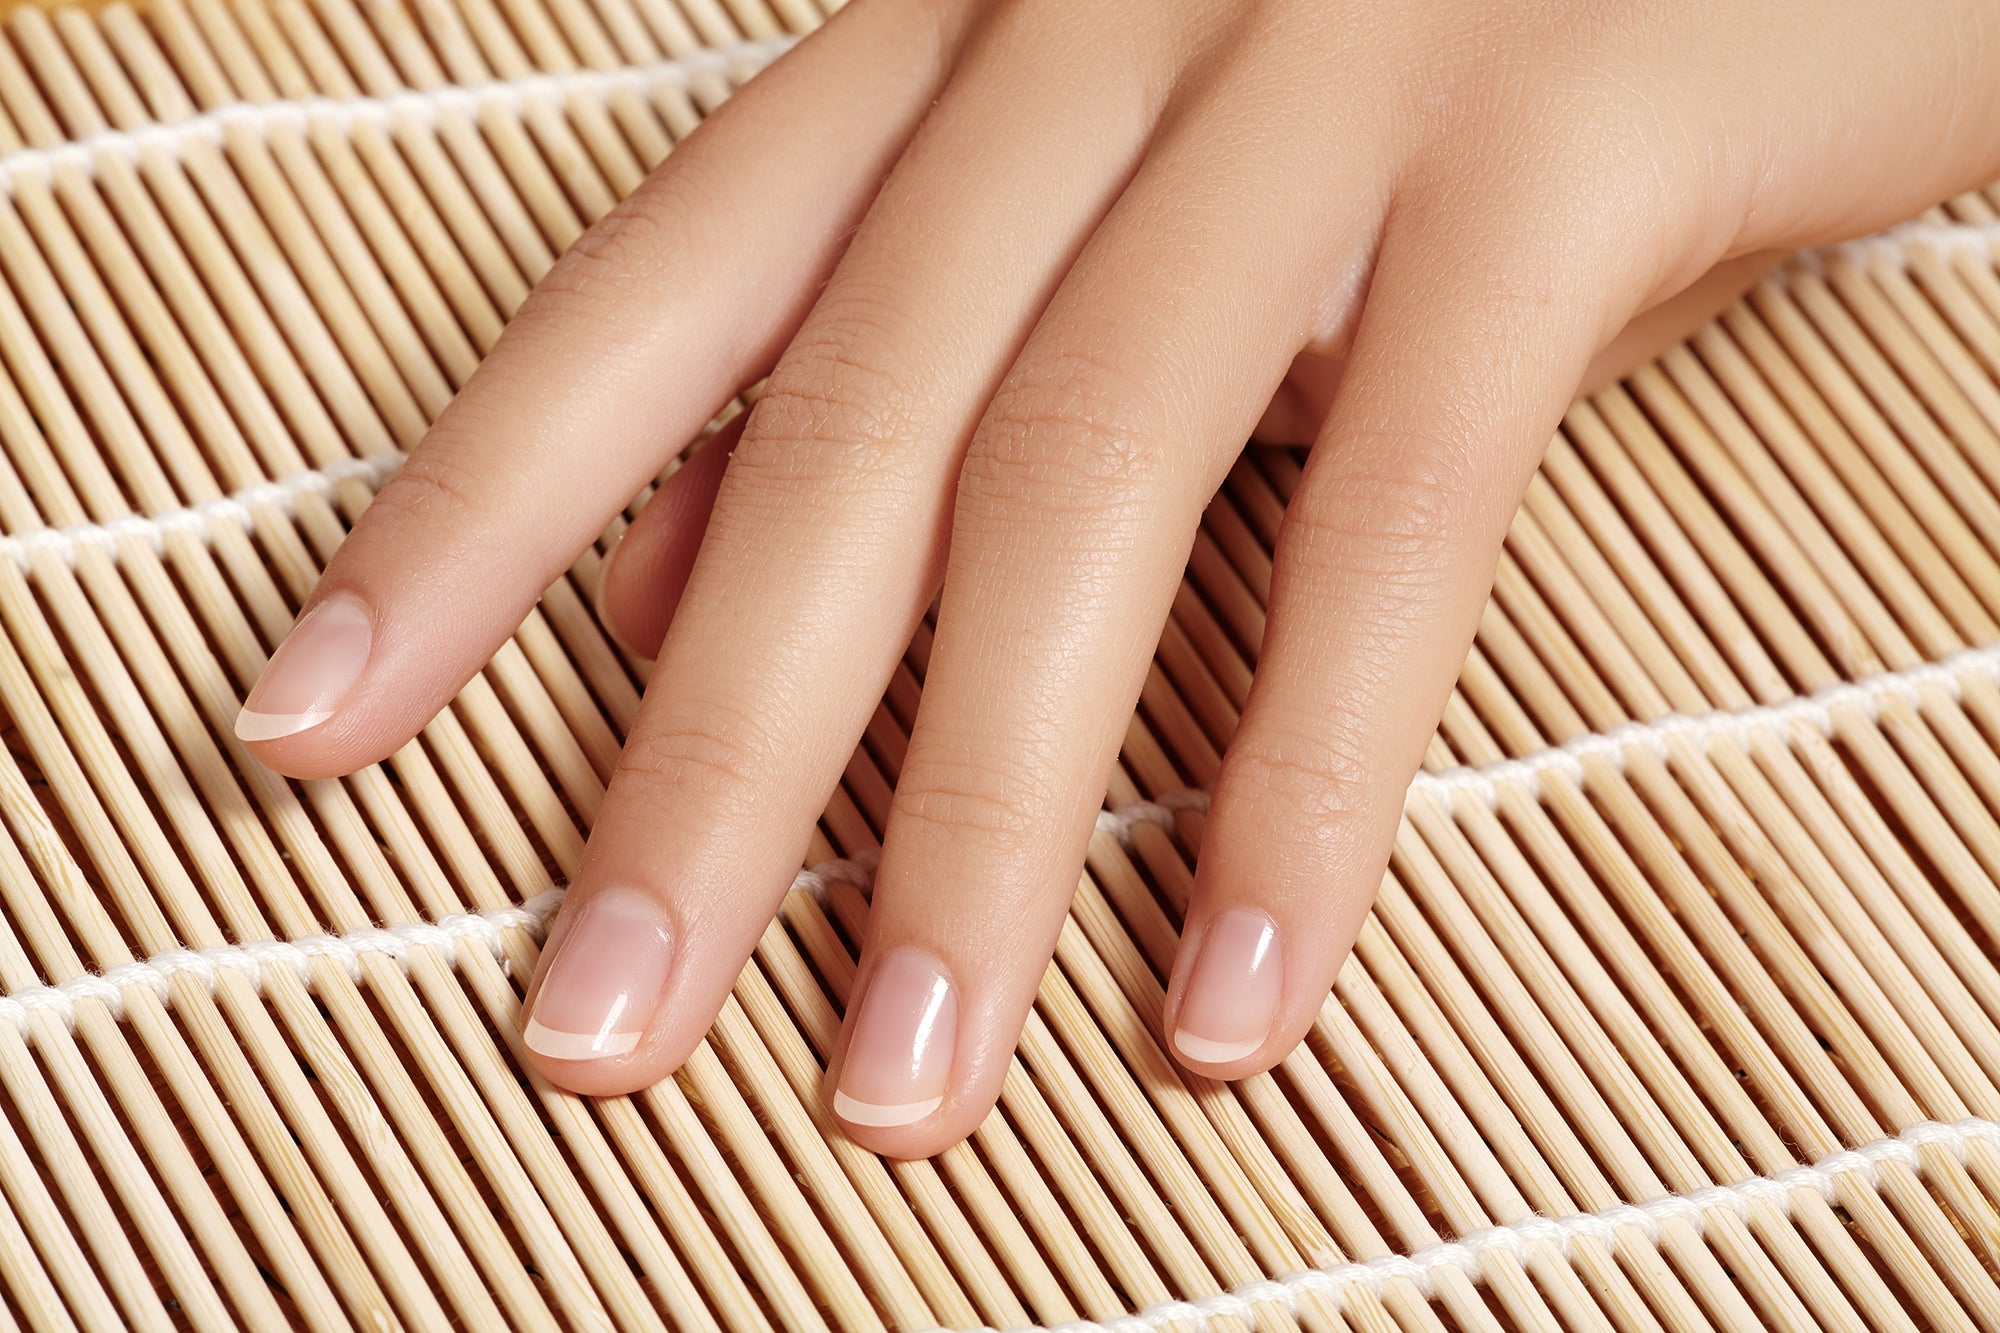 DO'S And DON'TS For Nurturing Growth Of Your Natural Nails - Paola